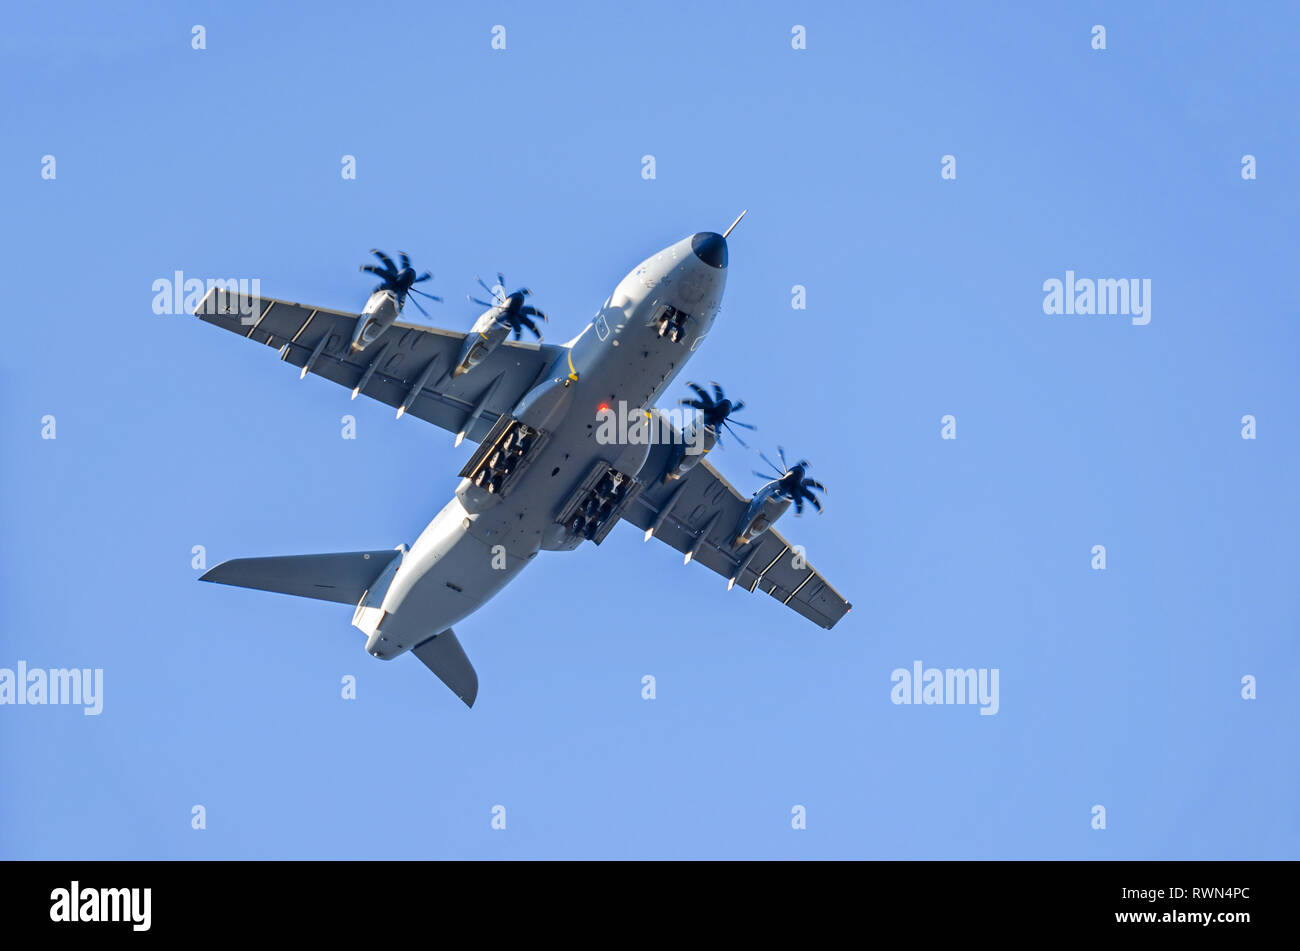 Berlin, Germany - February 22, 2019: Four-engine turboprop military transport aircraft (presumably Airbus A-400M Atlas) heading the landing strip Stock Photo